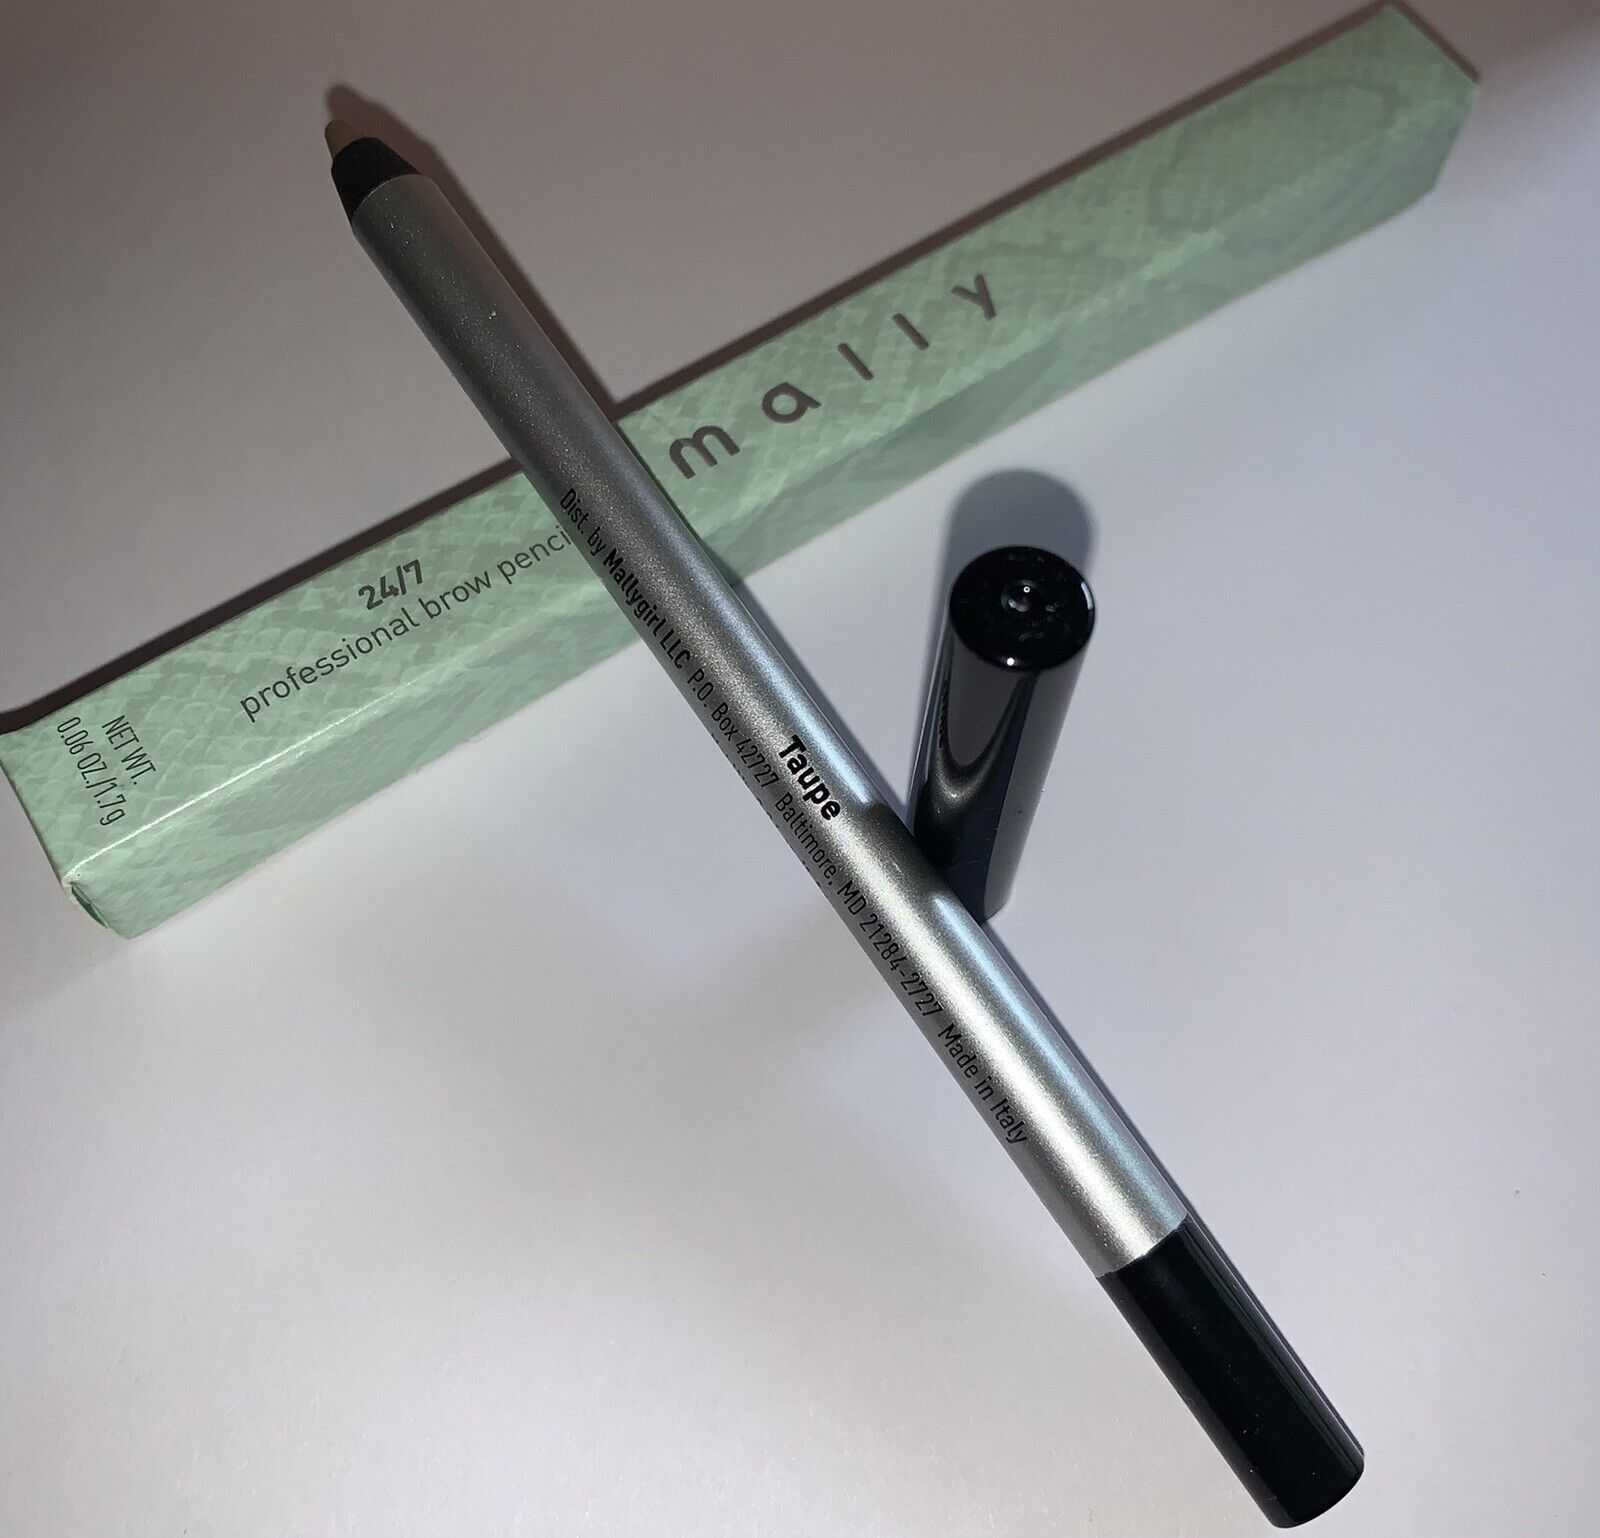 Mally 24/7 professional brow pencil Taupe.Full Size 1.7 g New In Box